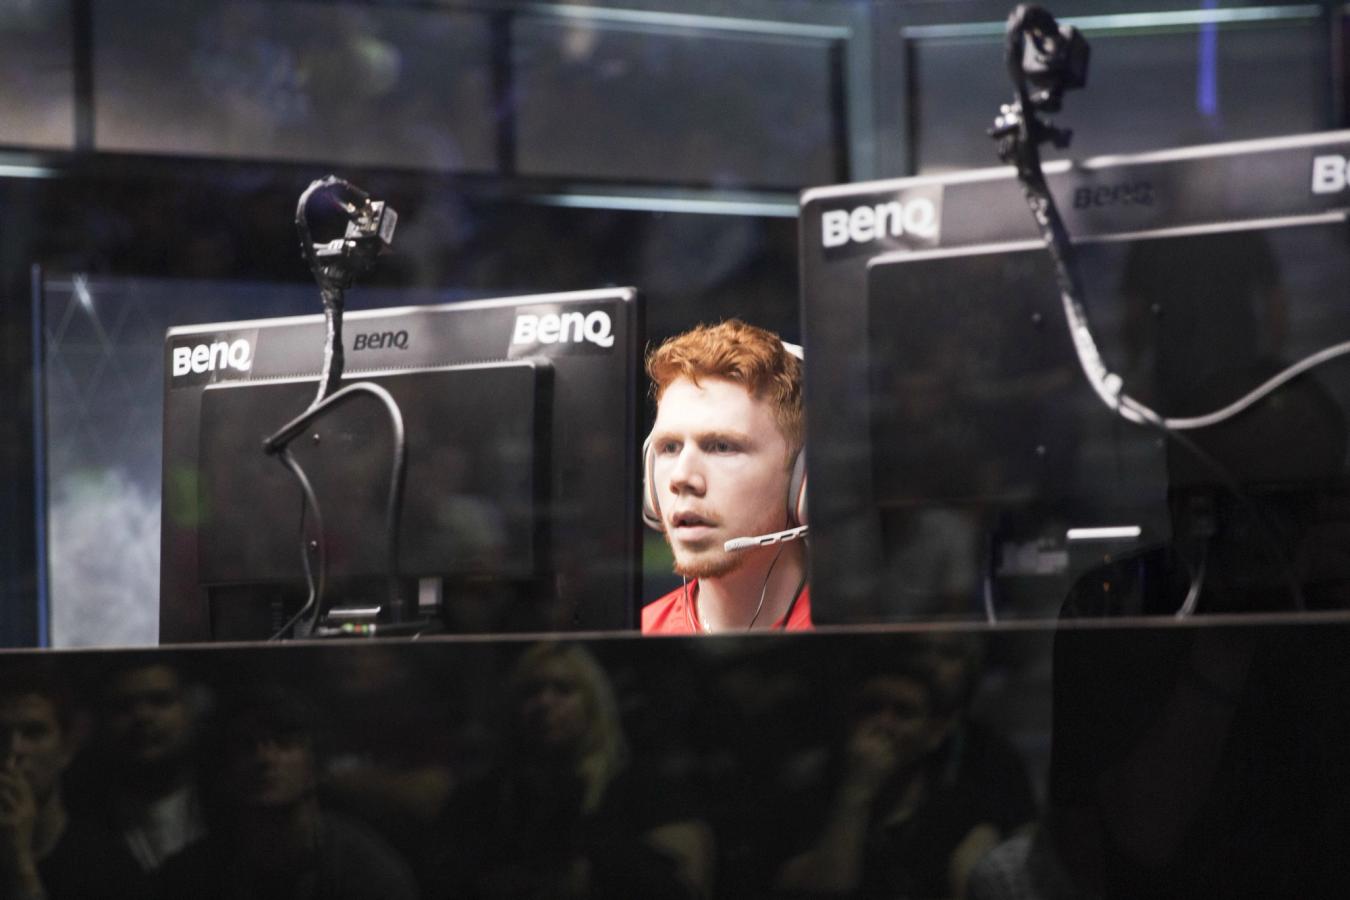 Enable at CoD Champs. Image courtesy of Monstervine.